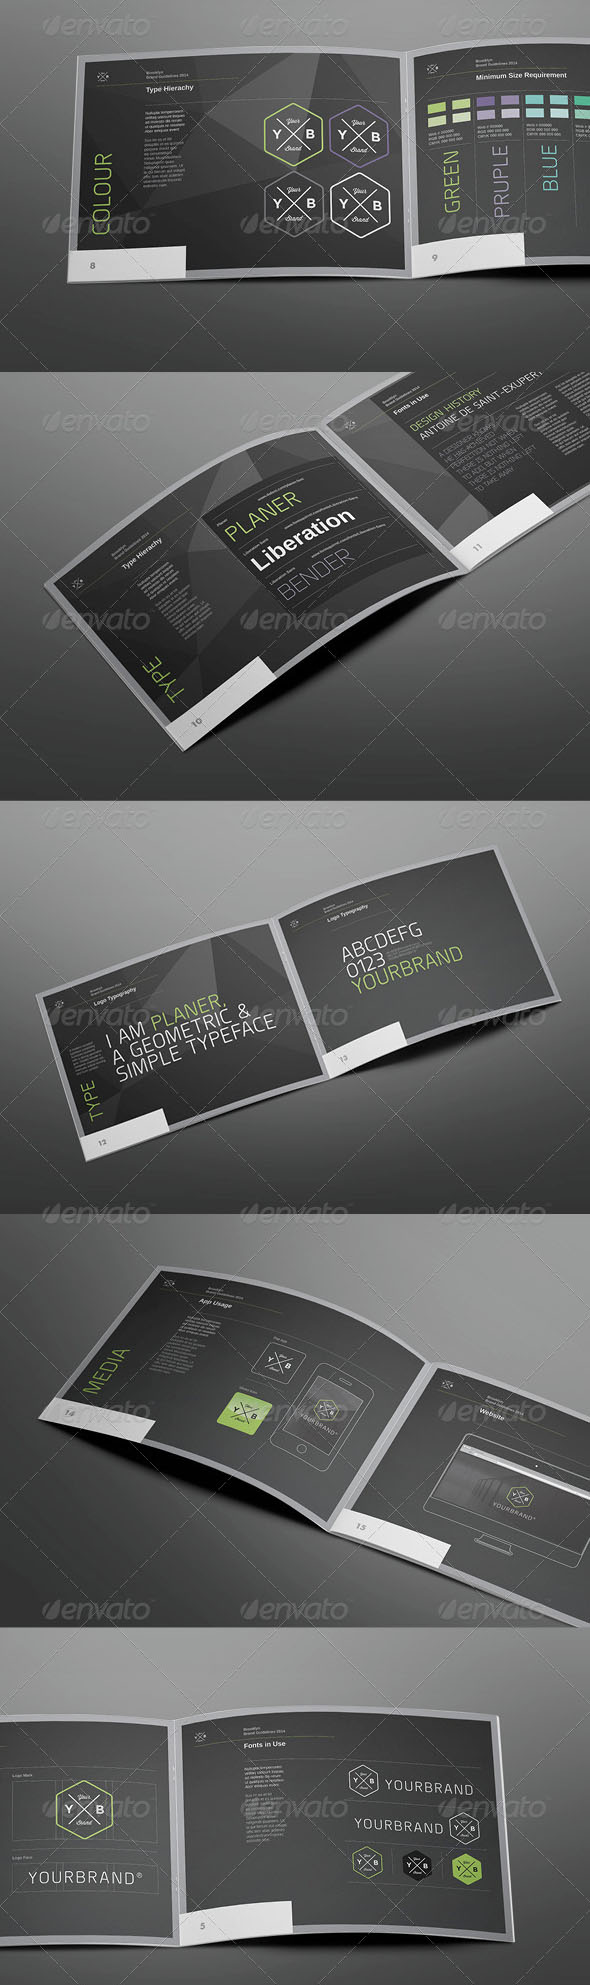 Brand Guidelines II Template